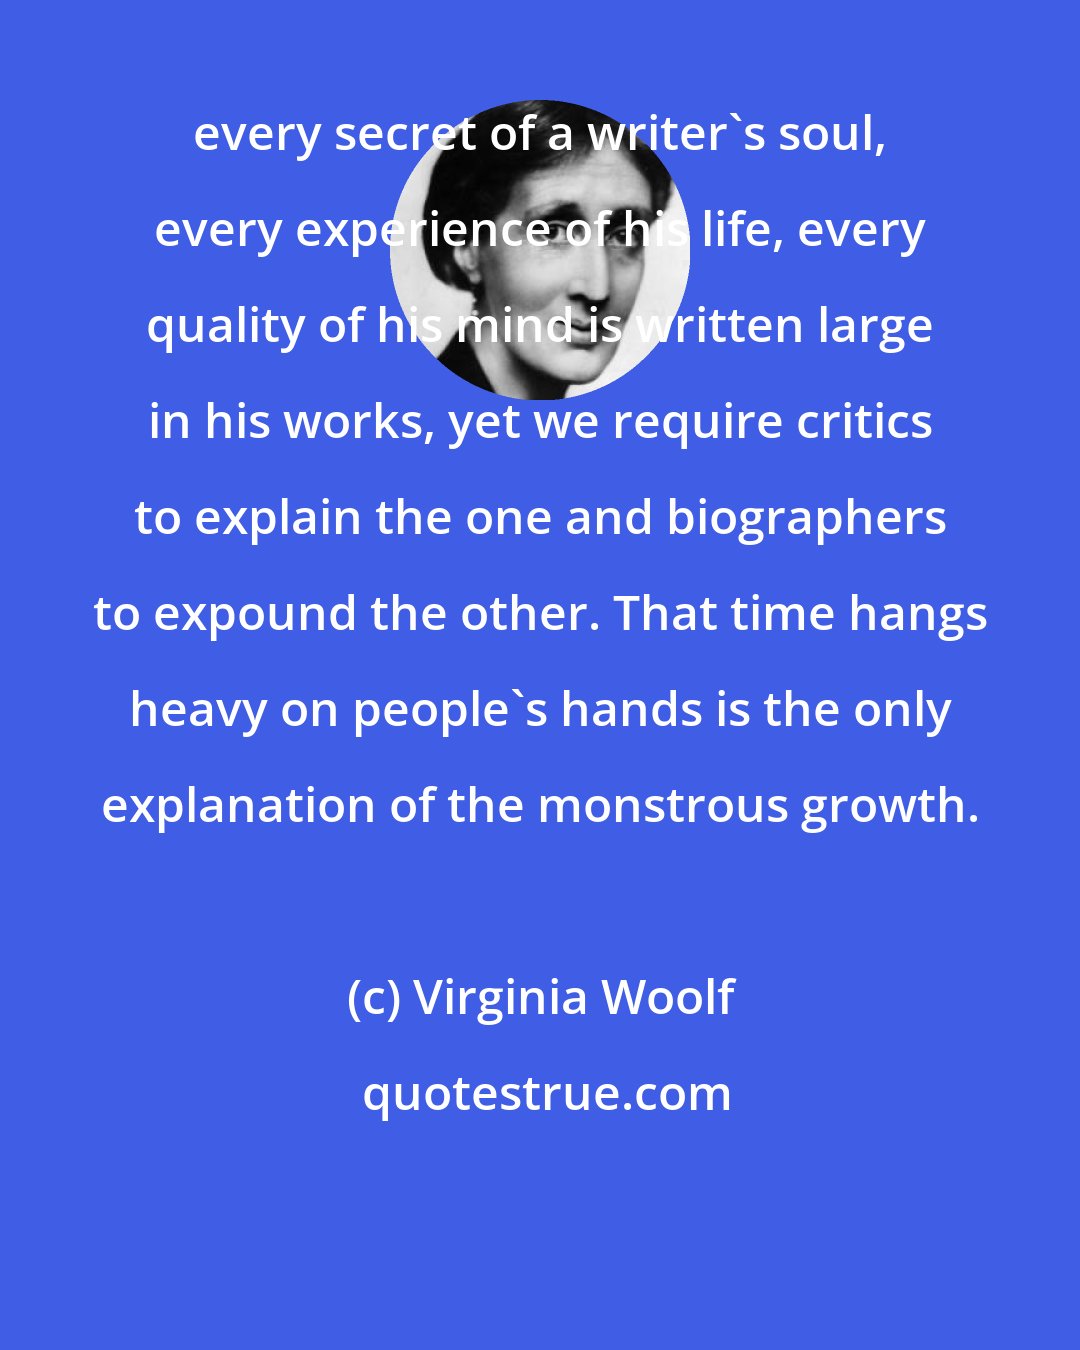 Virginia Woolf: every secret of a writer's soul, every experience of his life, every quality of his mind is written large in his works, yet we require critics to explain the one and biographers to expound the other. That time hangs heavy on people's hands is the only explanation of the monstrous growth.